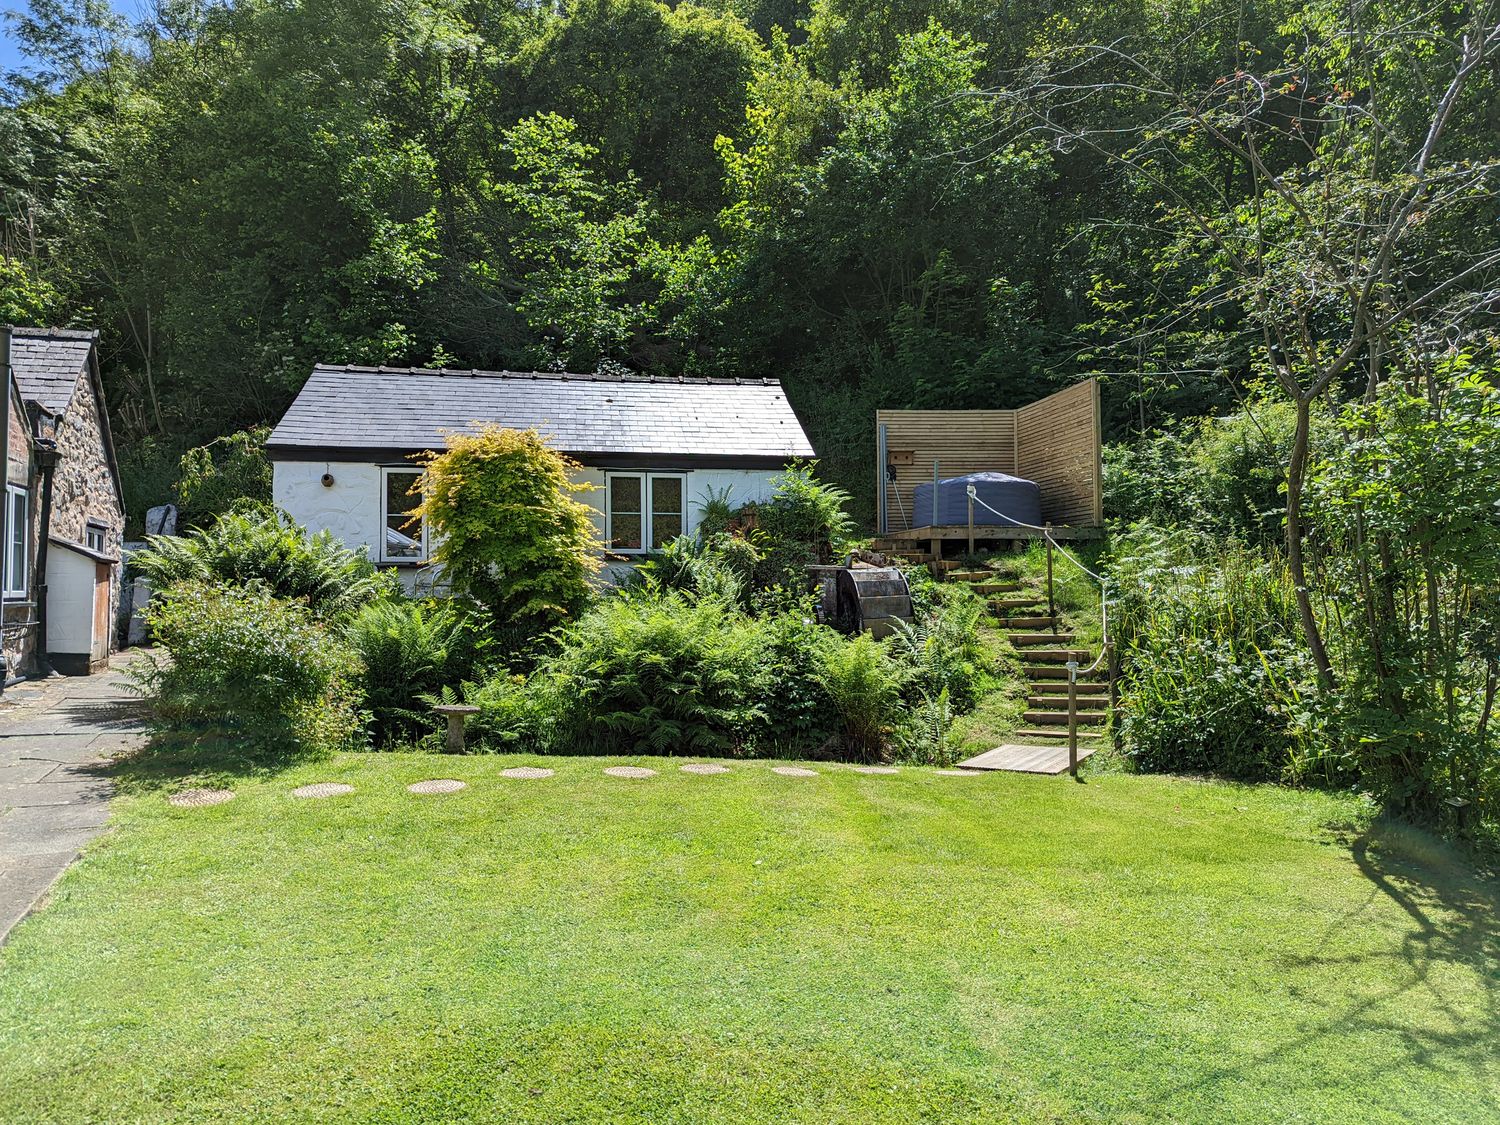 Little Pandy Cottage - North Wales - 1089958 - photo 1